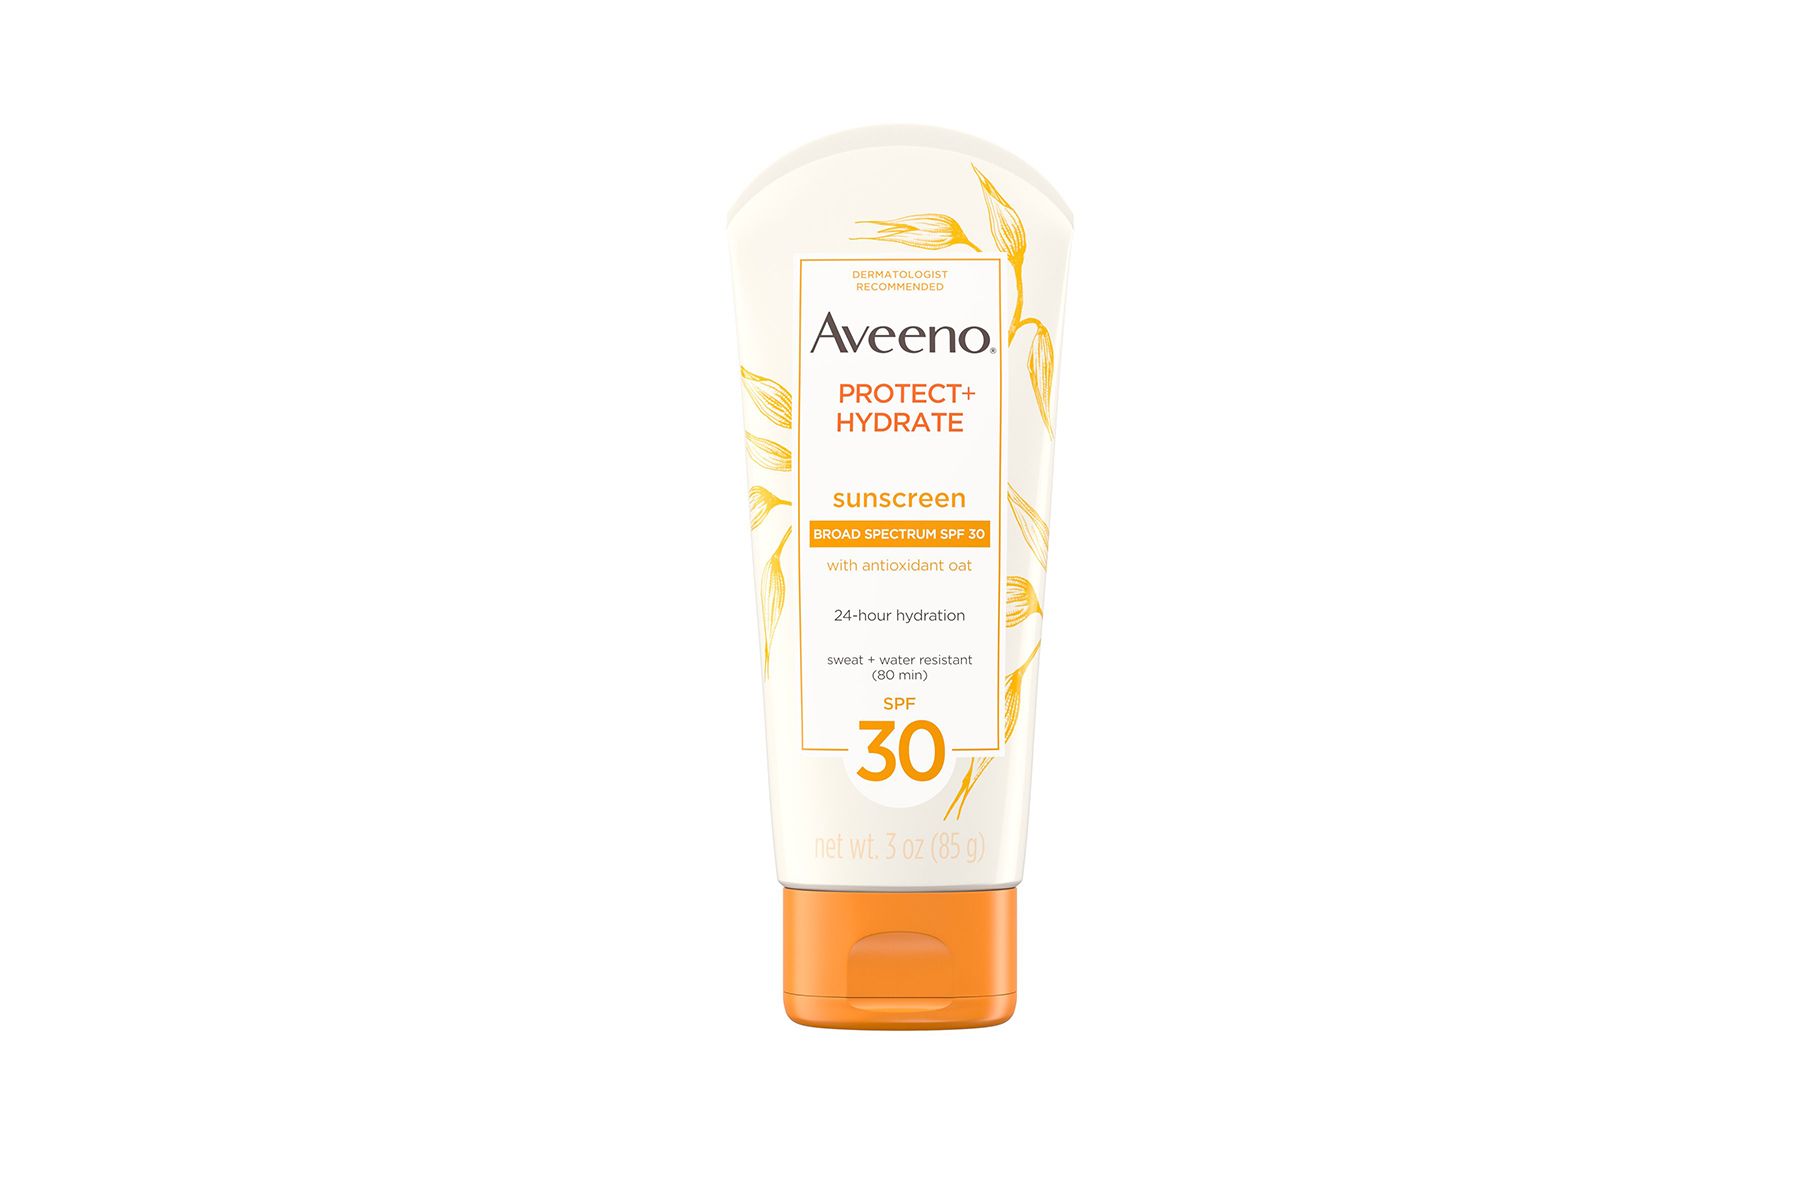 Grianscéithe Aveeno Protect + Hydrate